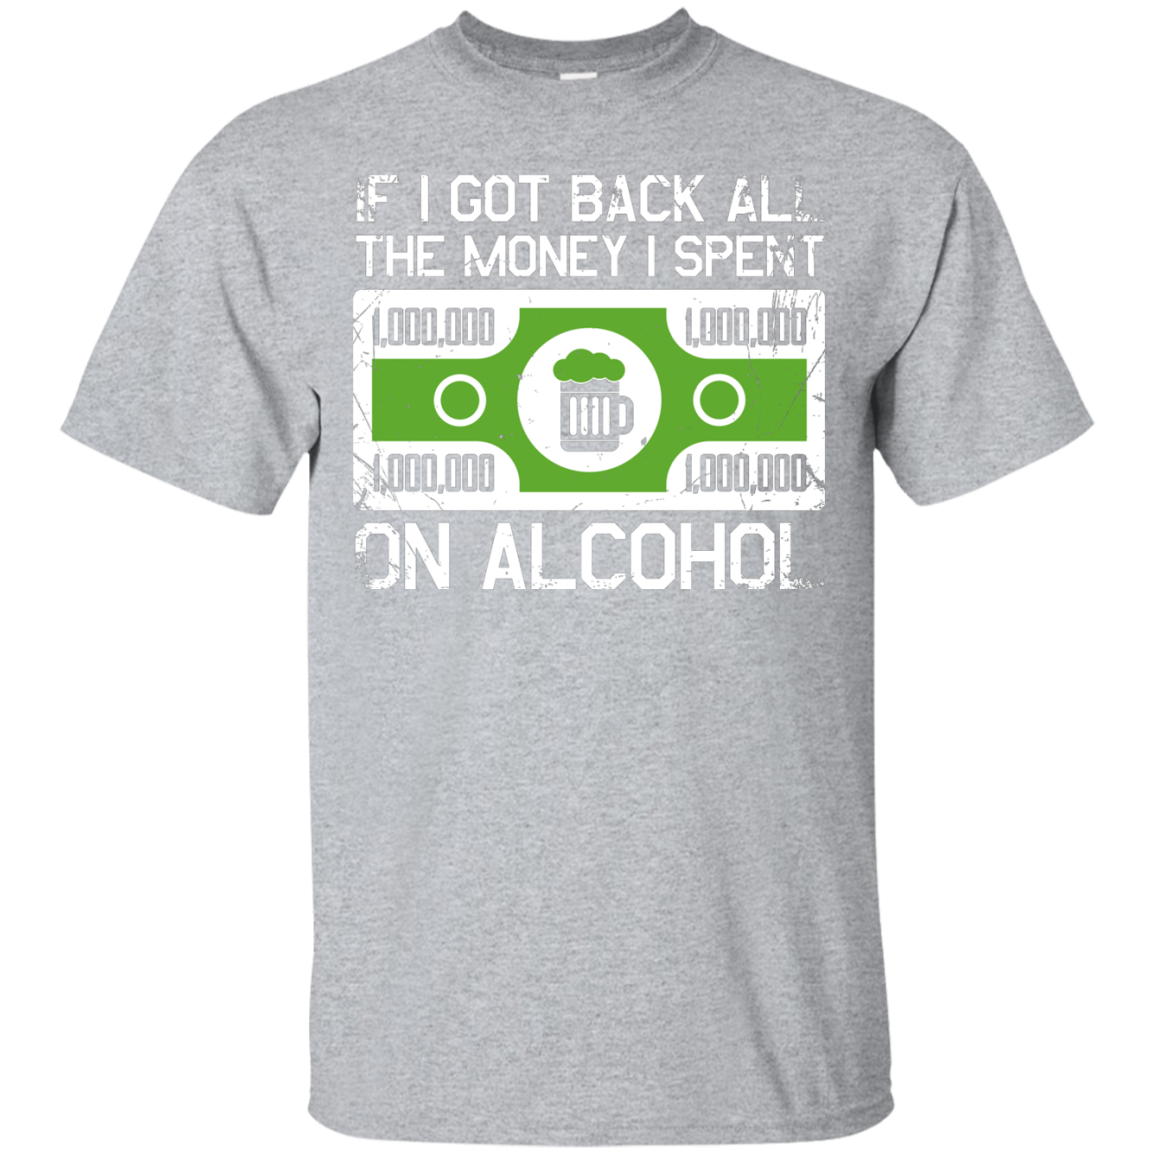 If I Got Back All The Money I Spent On Alcohol T-Shirt Apparel - The Beer Lodge